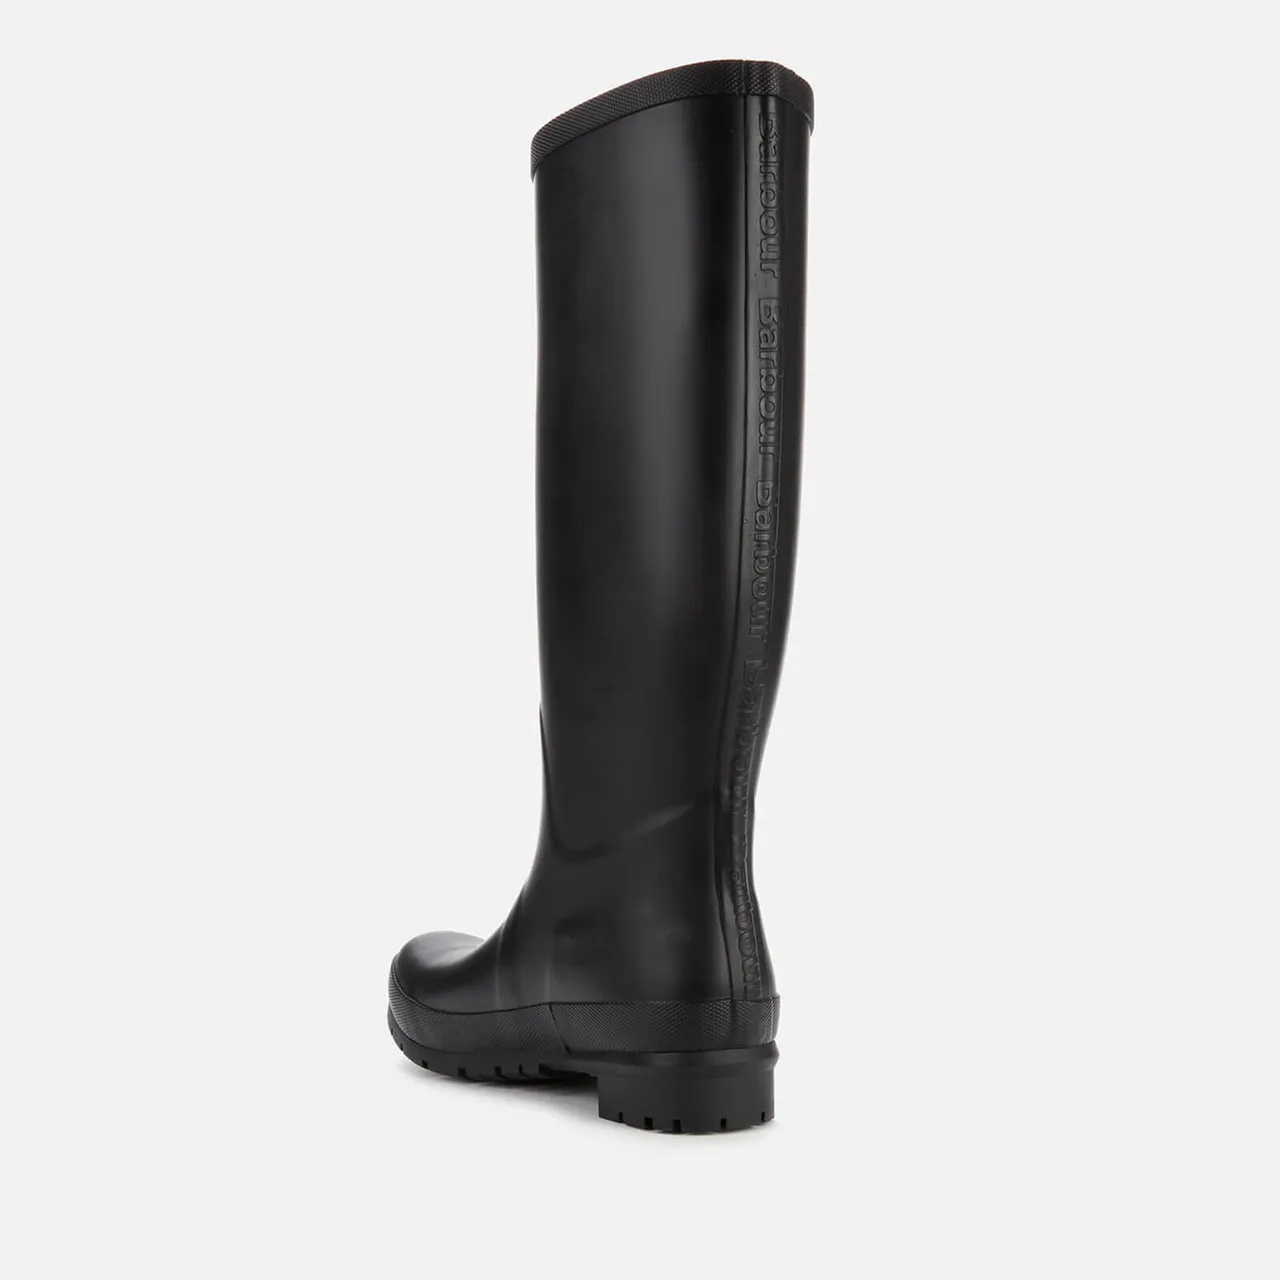 Barbour Women's Abbey Tall Wellies - Black - UK